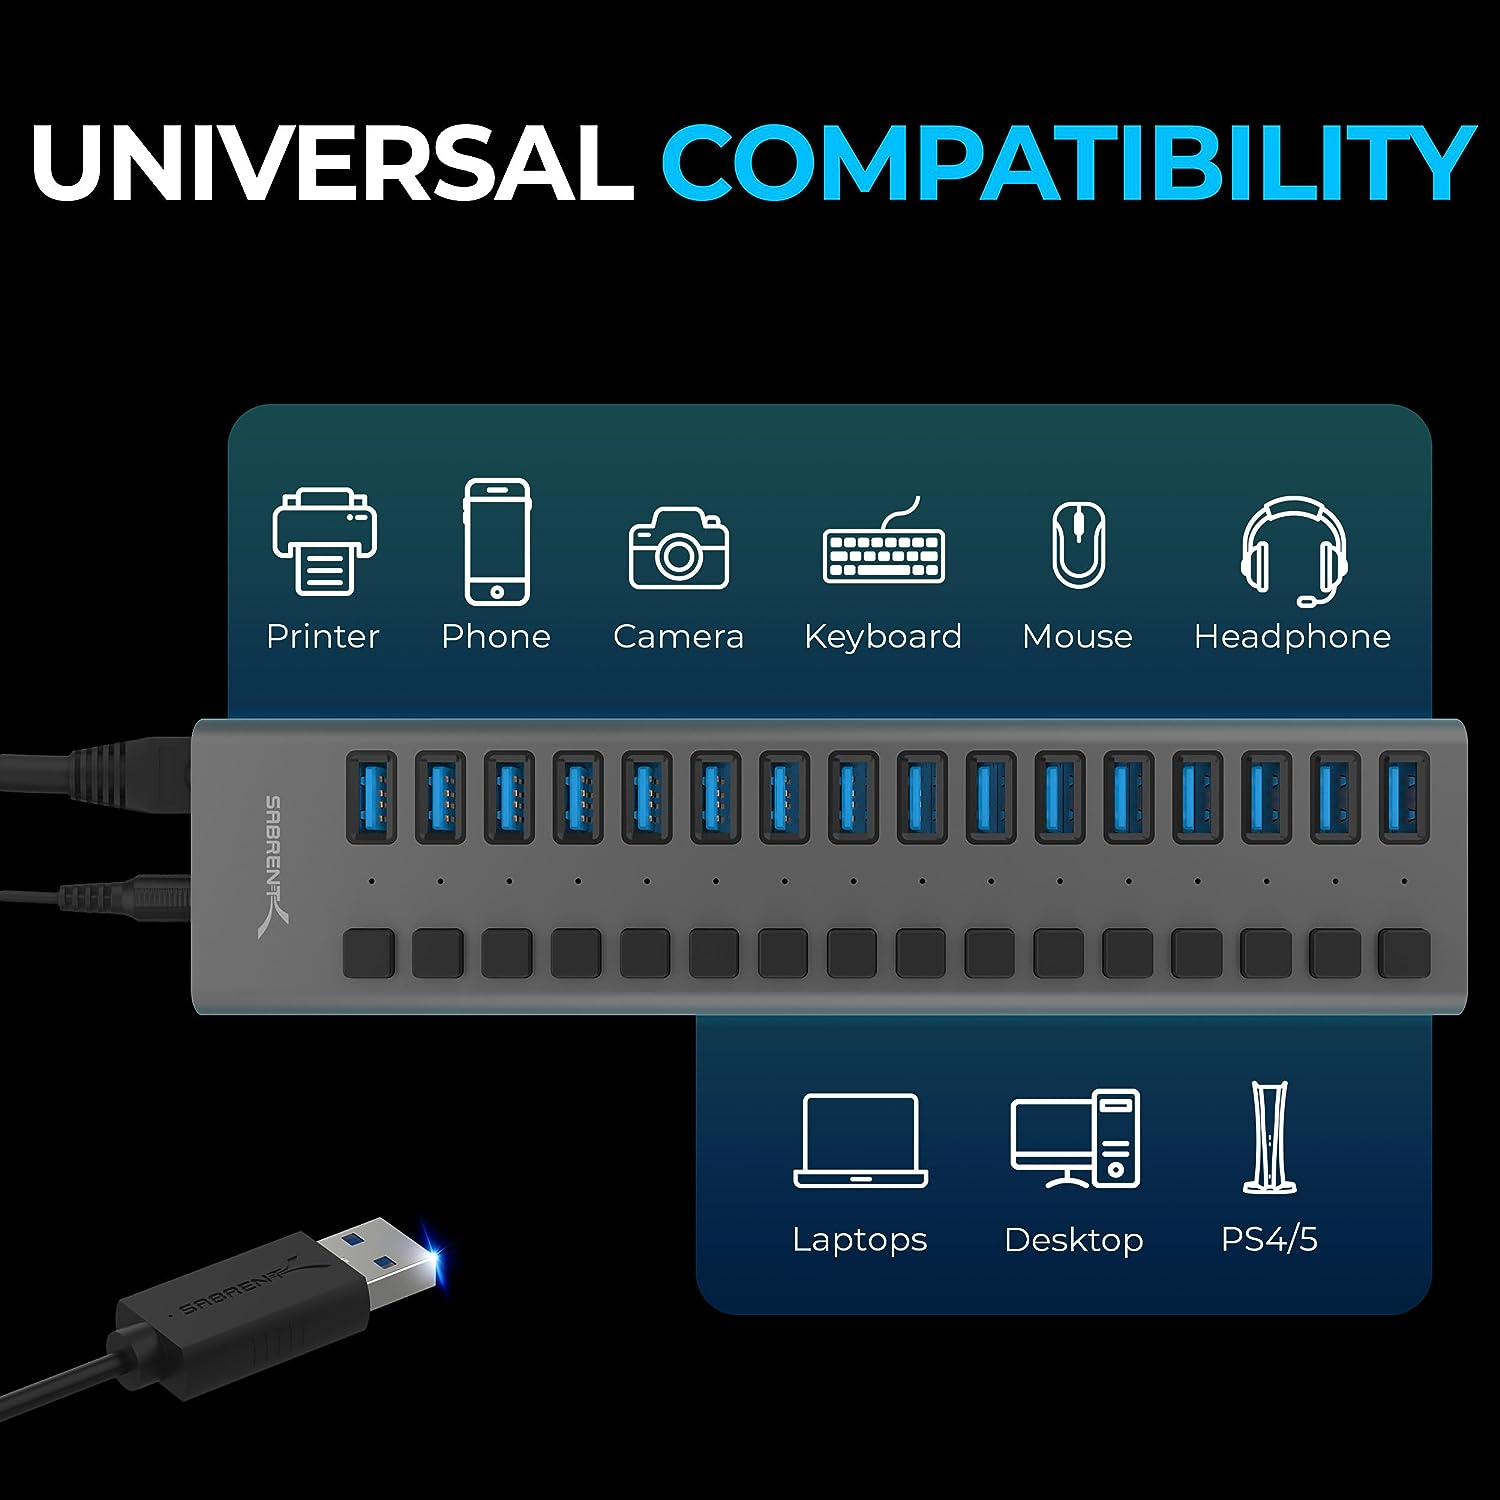 SABRENT 16 Port USB 3.0 Data HUB and Charger with Individual switches [90 Watts] (HB PU16)